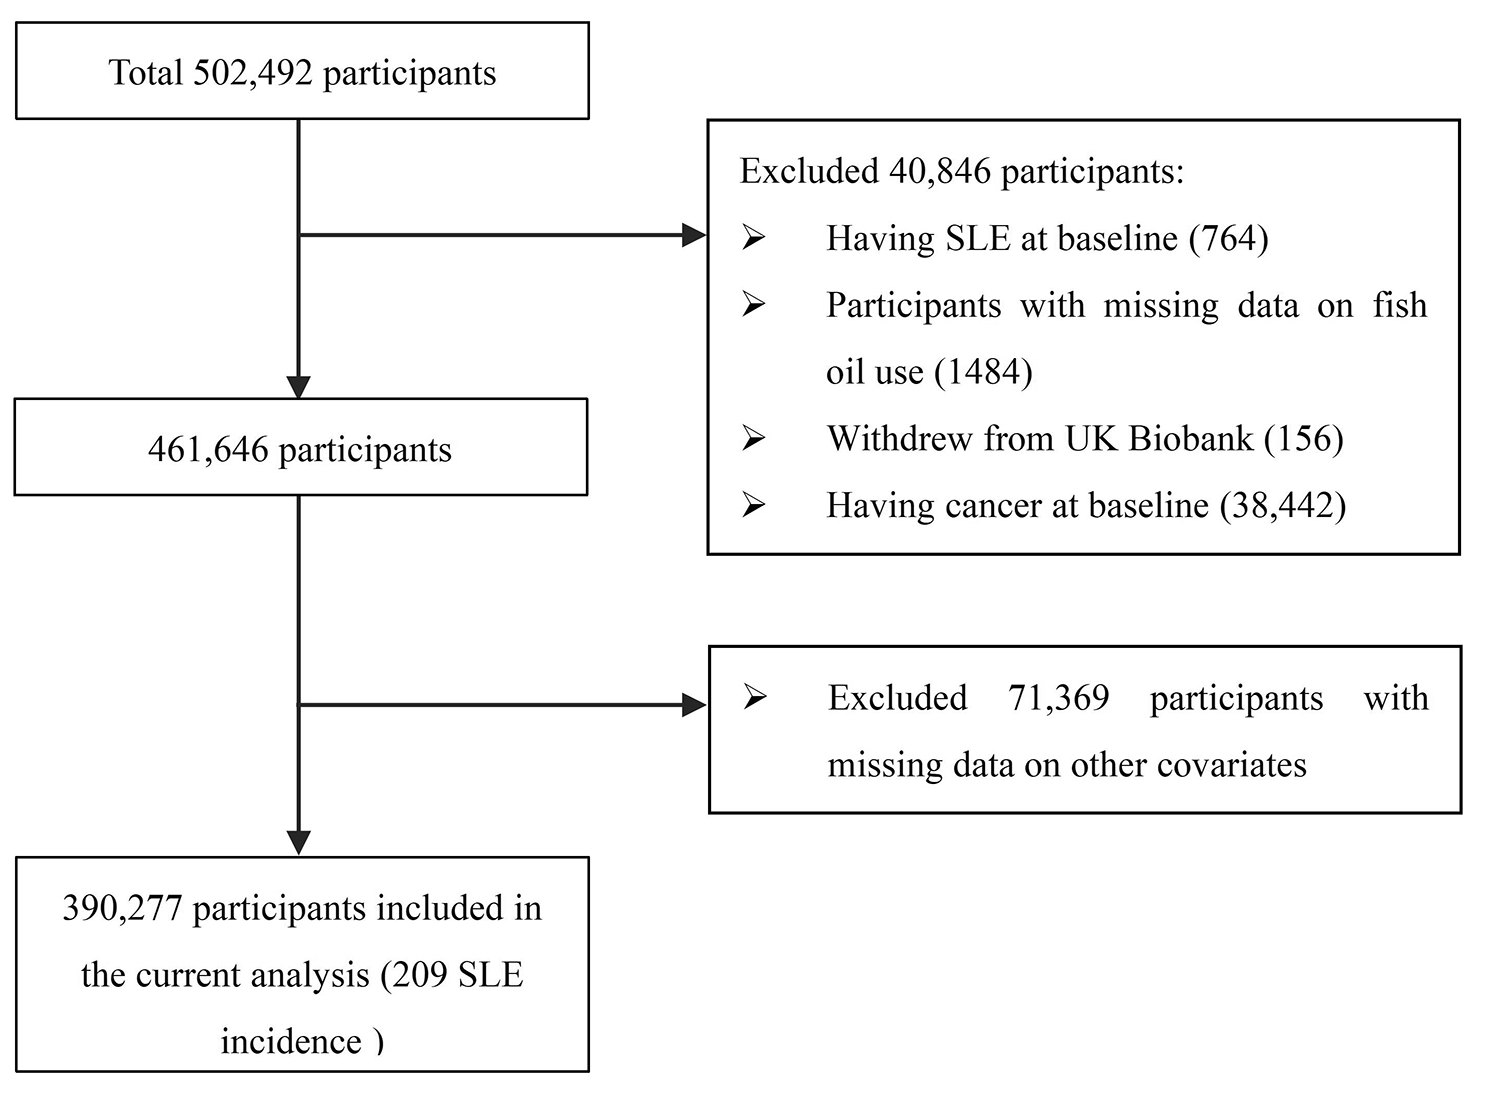 Fish oil supplementation and risk of incident systemic lupus erythematosus: a large population-based prospective study